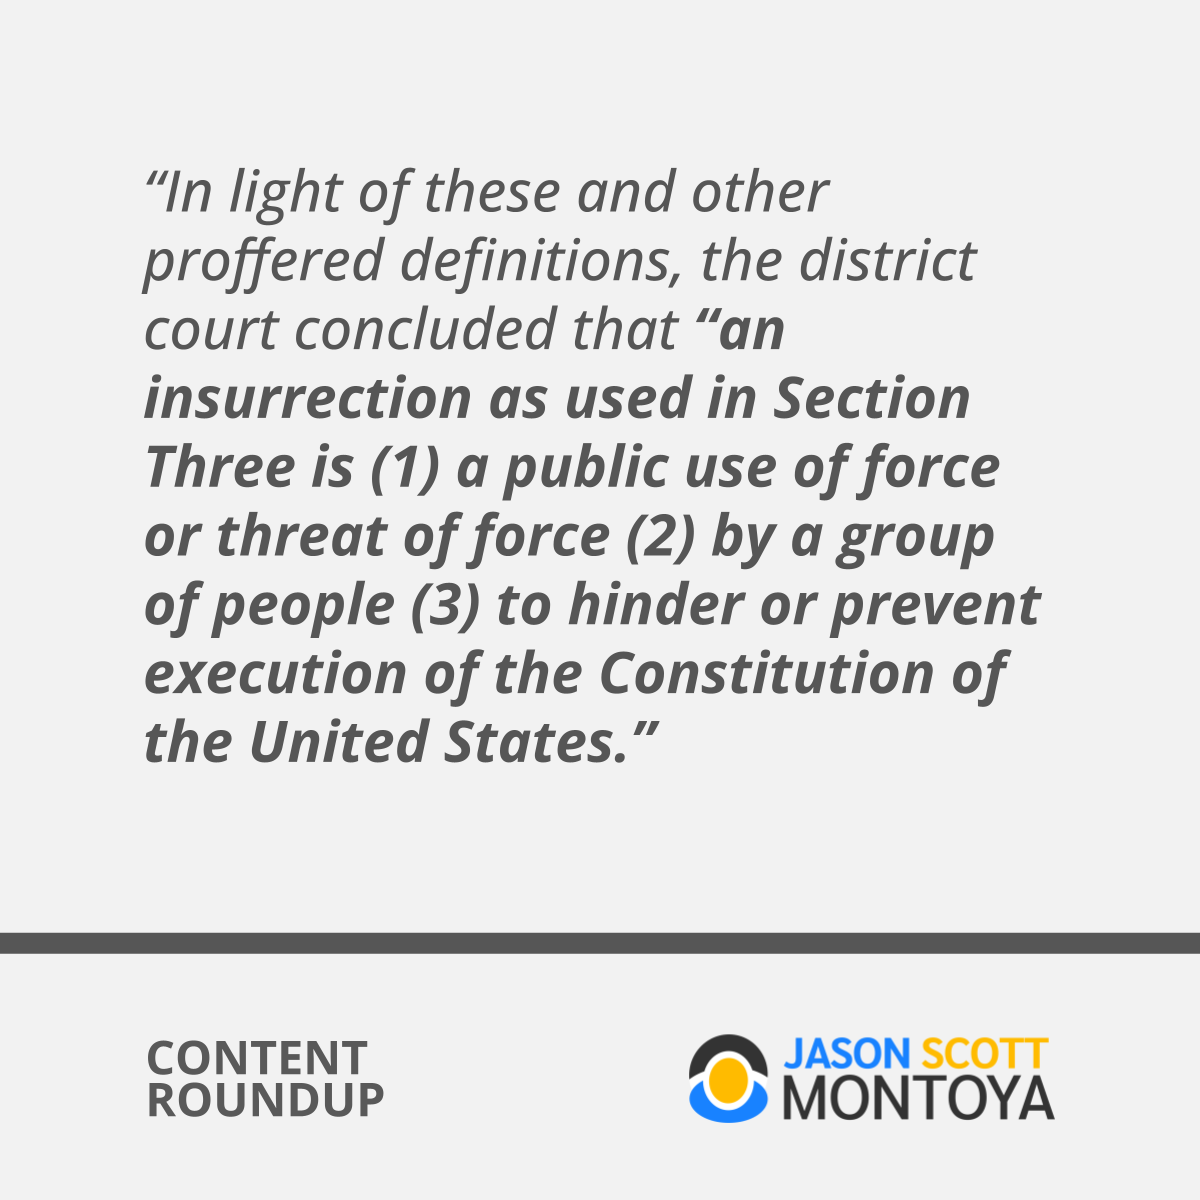 “In light of these and other proffered definitions, the district court concluded that “an insurrection as used in Section Three is (1) a public use of force or threat of force (2) by a group of people (3) to hinder or prevent execution of the Constitution of the United States.”